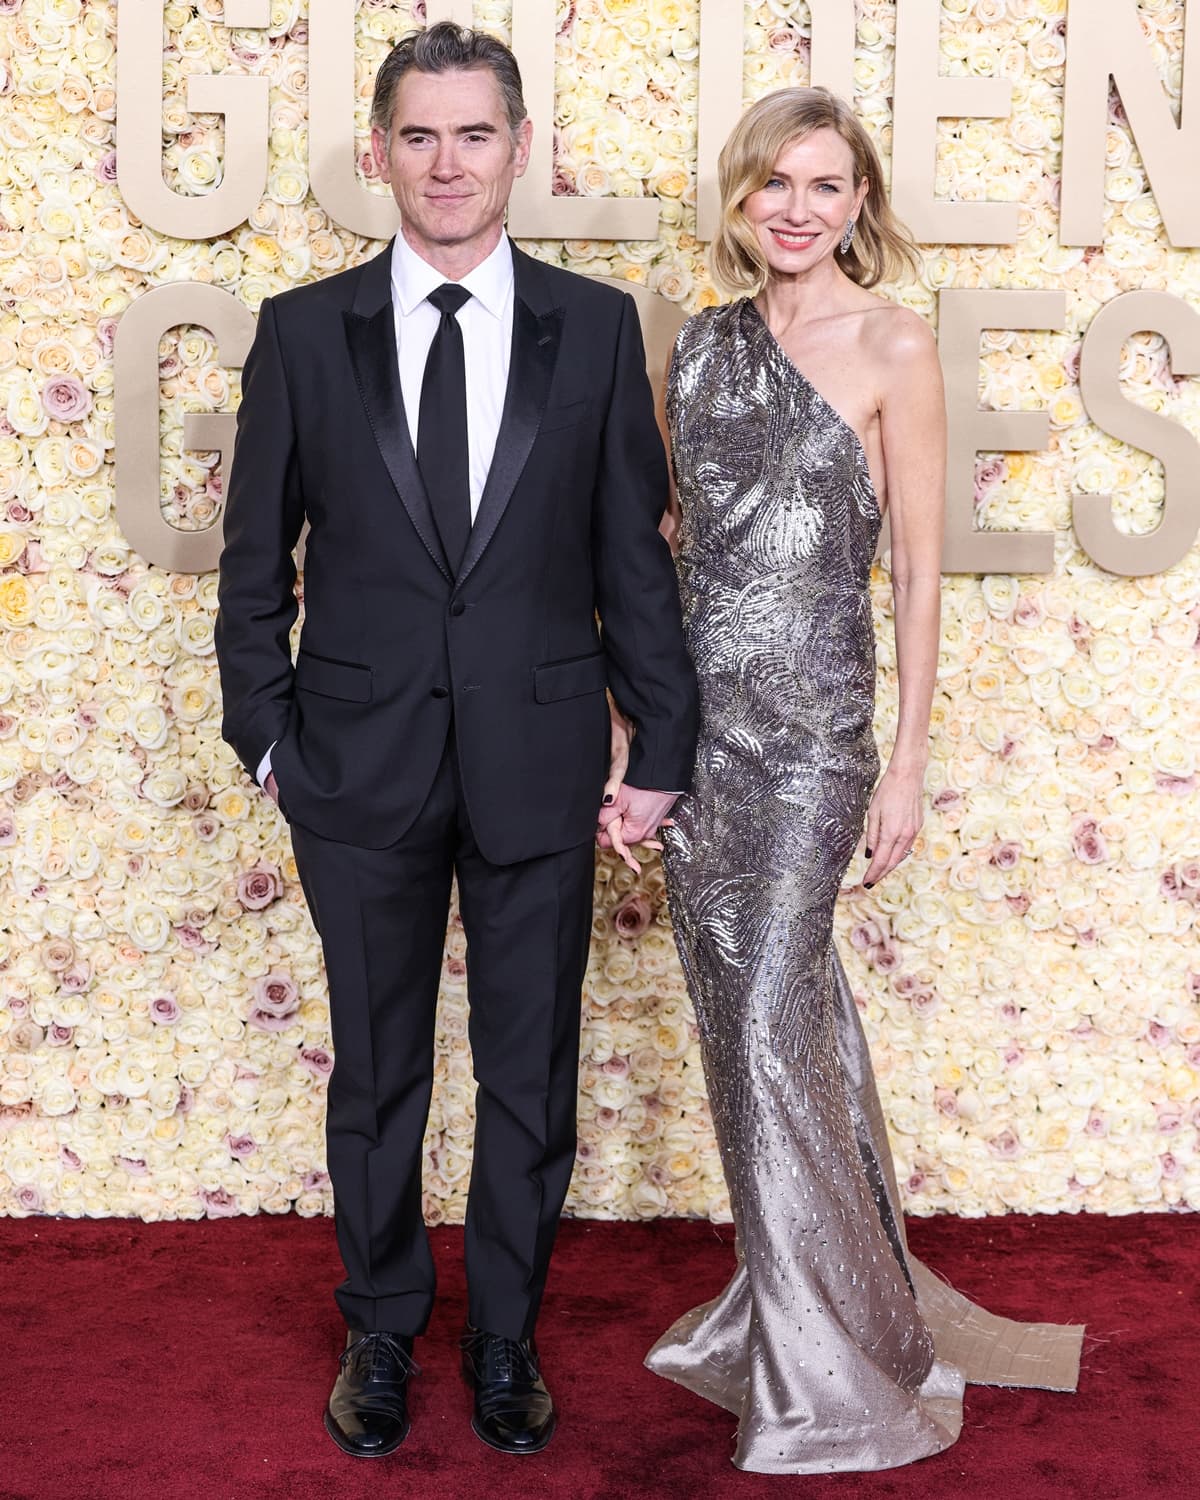 Hollywood's dazzling couple, Naomi Watts and Billy Crudup, make their glamorous debut on the Golden Globe red carpet, showcasing their love and style